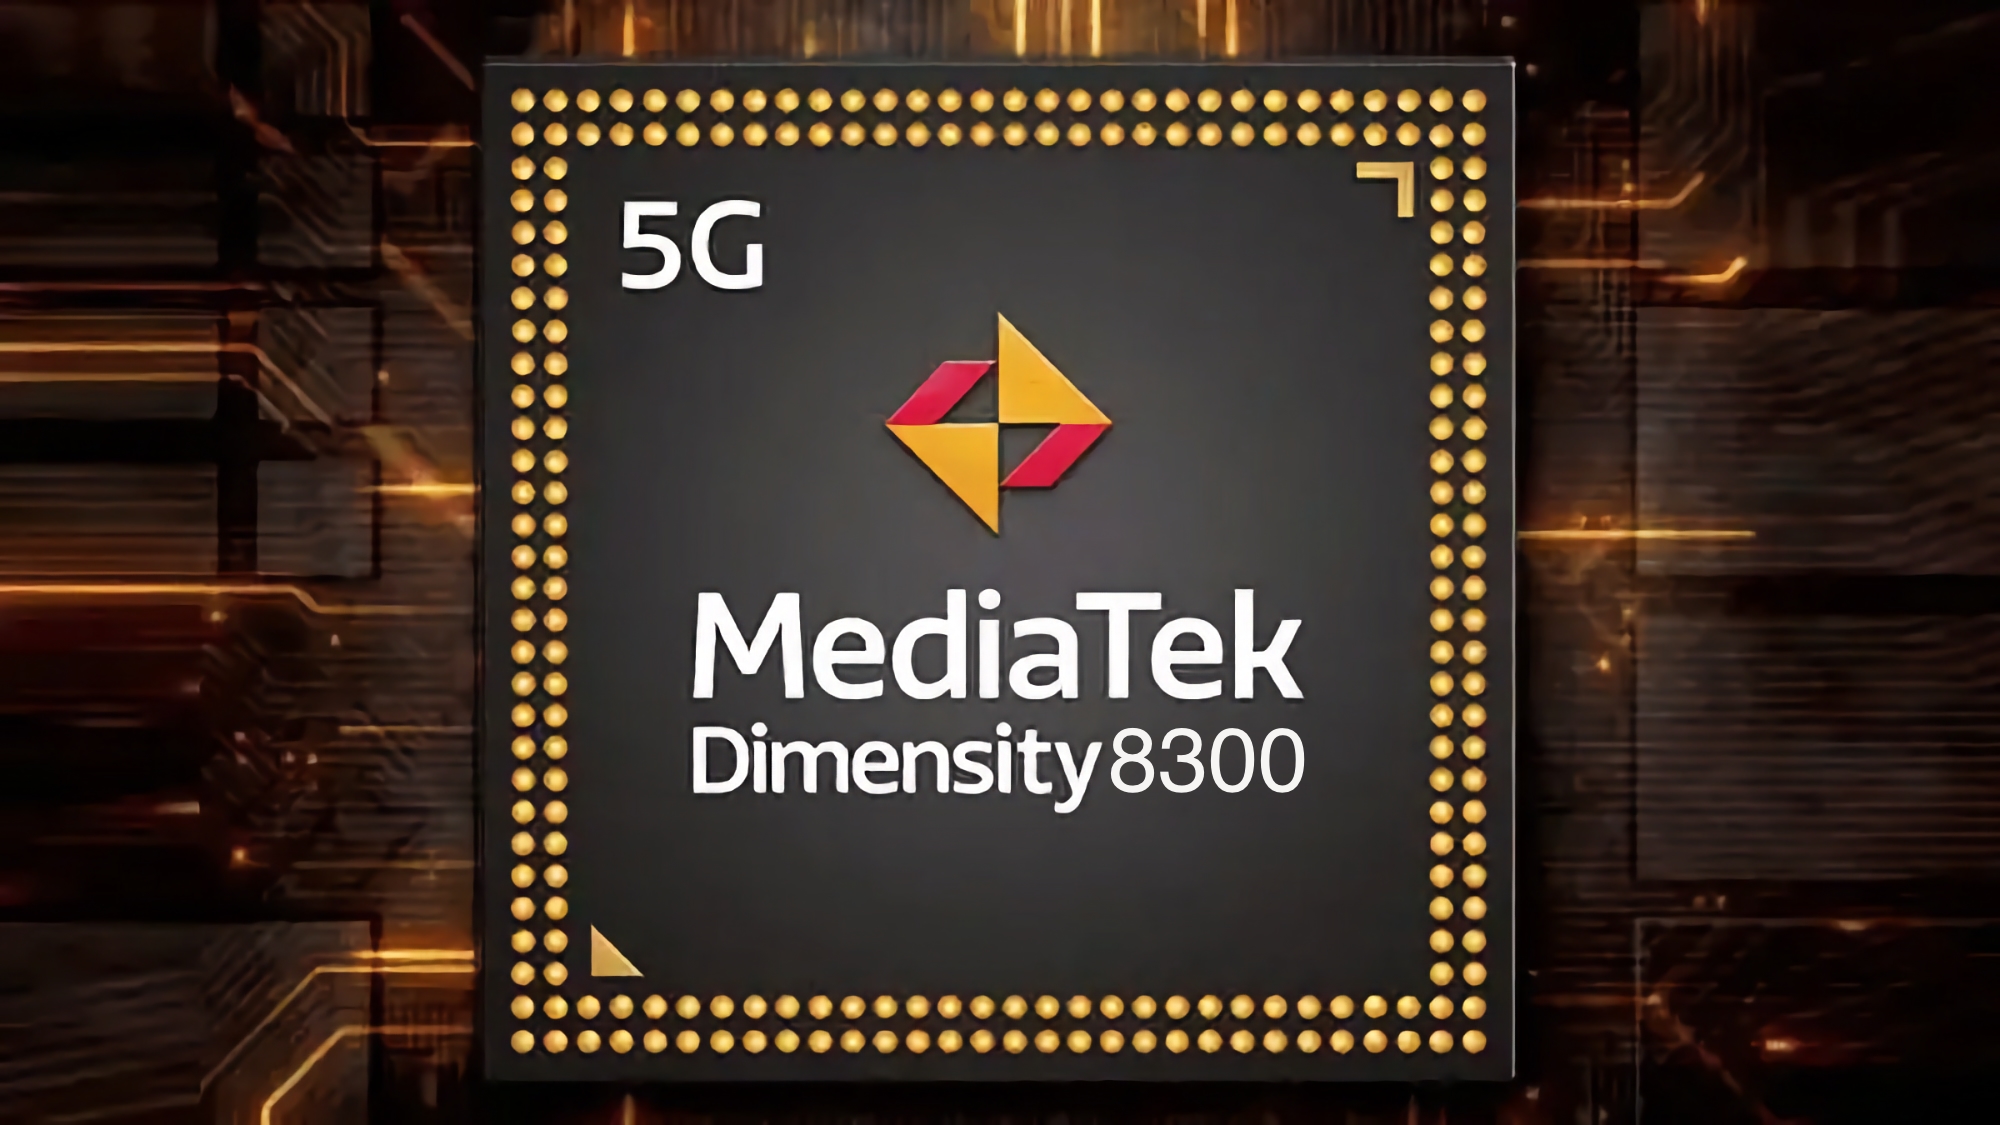 It's official: MediaTek will unveil the Dimensity 8300 processor at a presentation on November 21